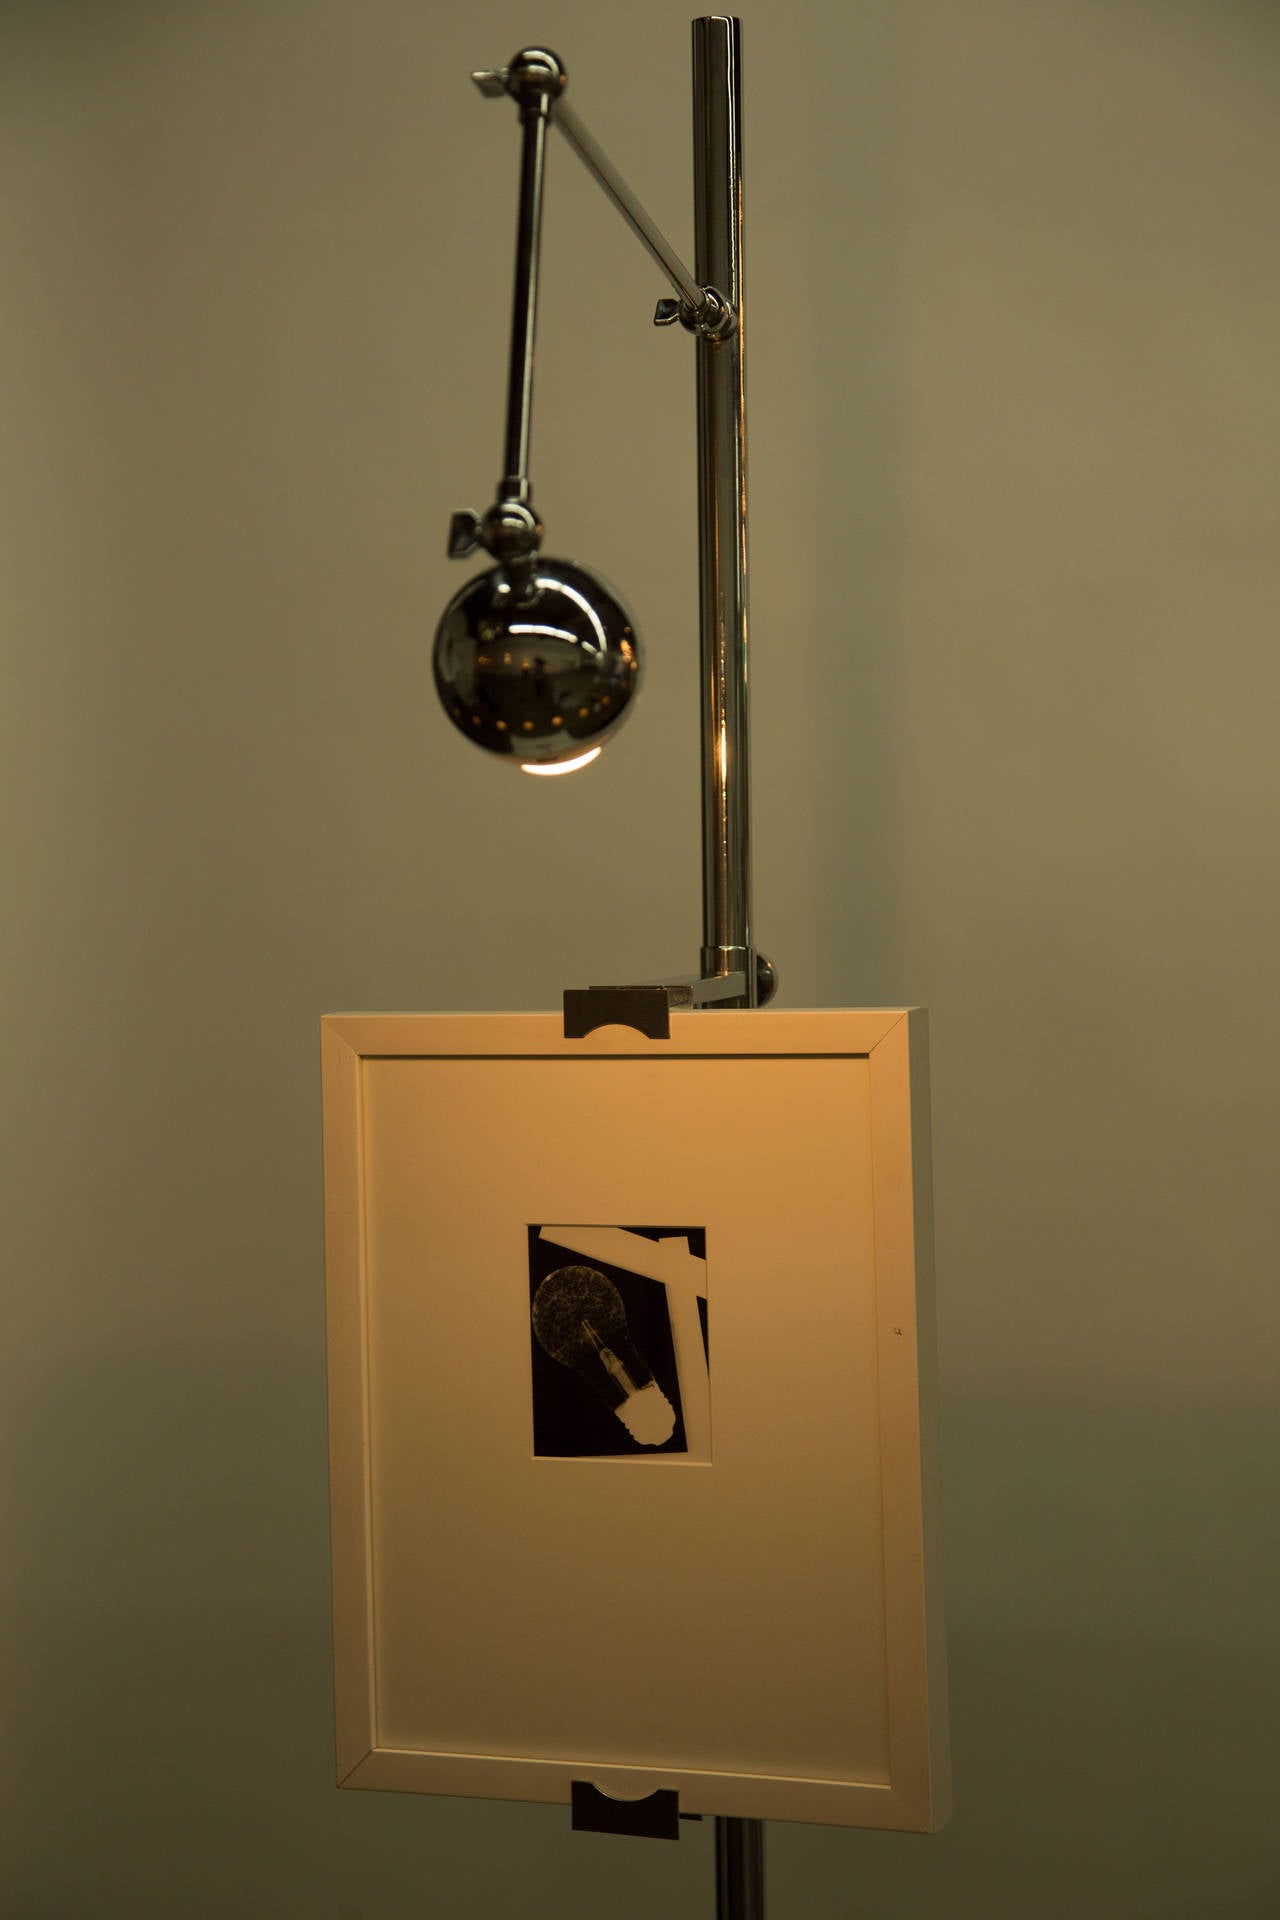 Easel Floor Light by Angelo Lelli for Arredoluce designed and manufactured in Italy circa 1960's. Chrome plated brass, pivoting  shade, with adjustable arm for displaying artwork, marble base. Original cord. Takes one E27 60w maximum bulb